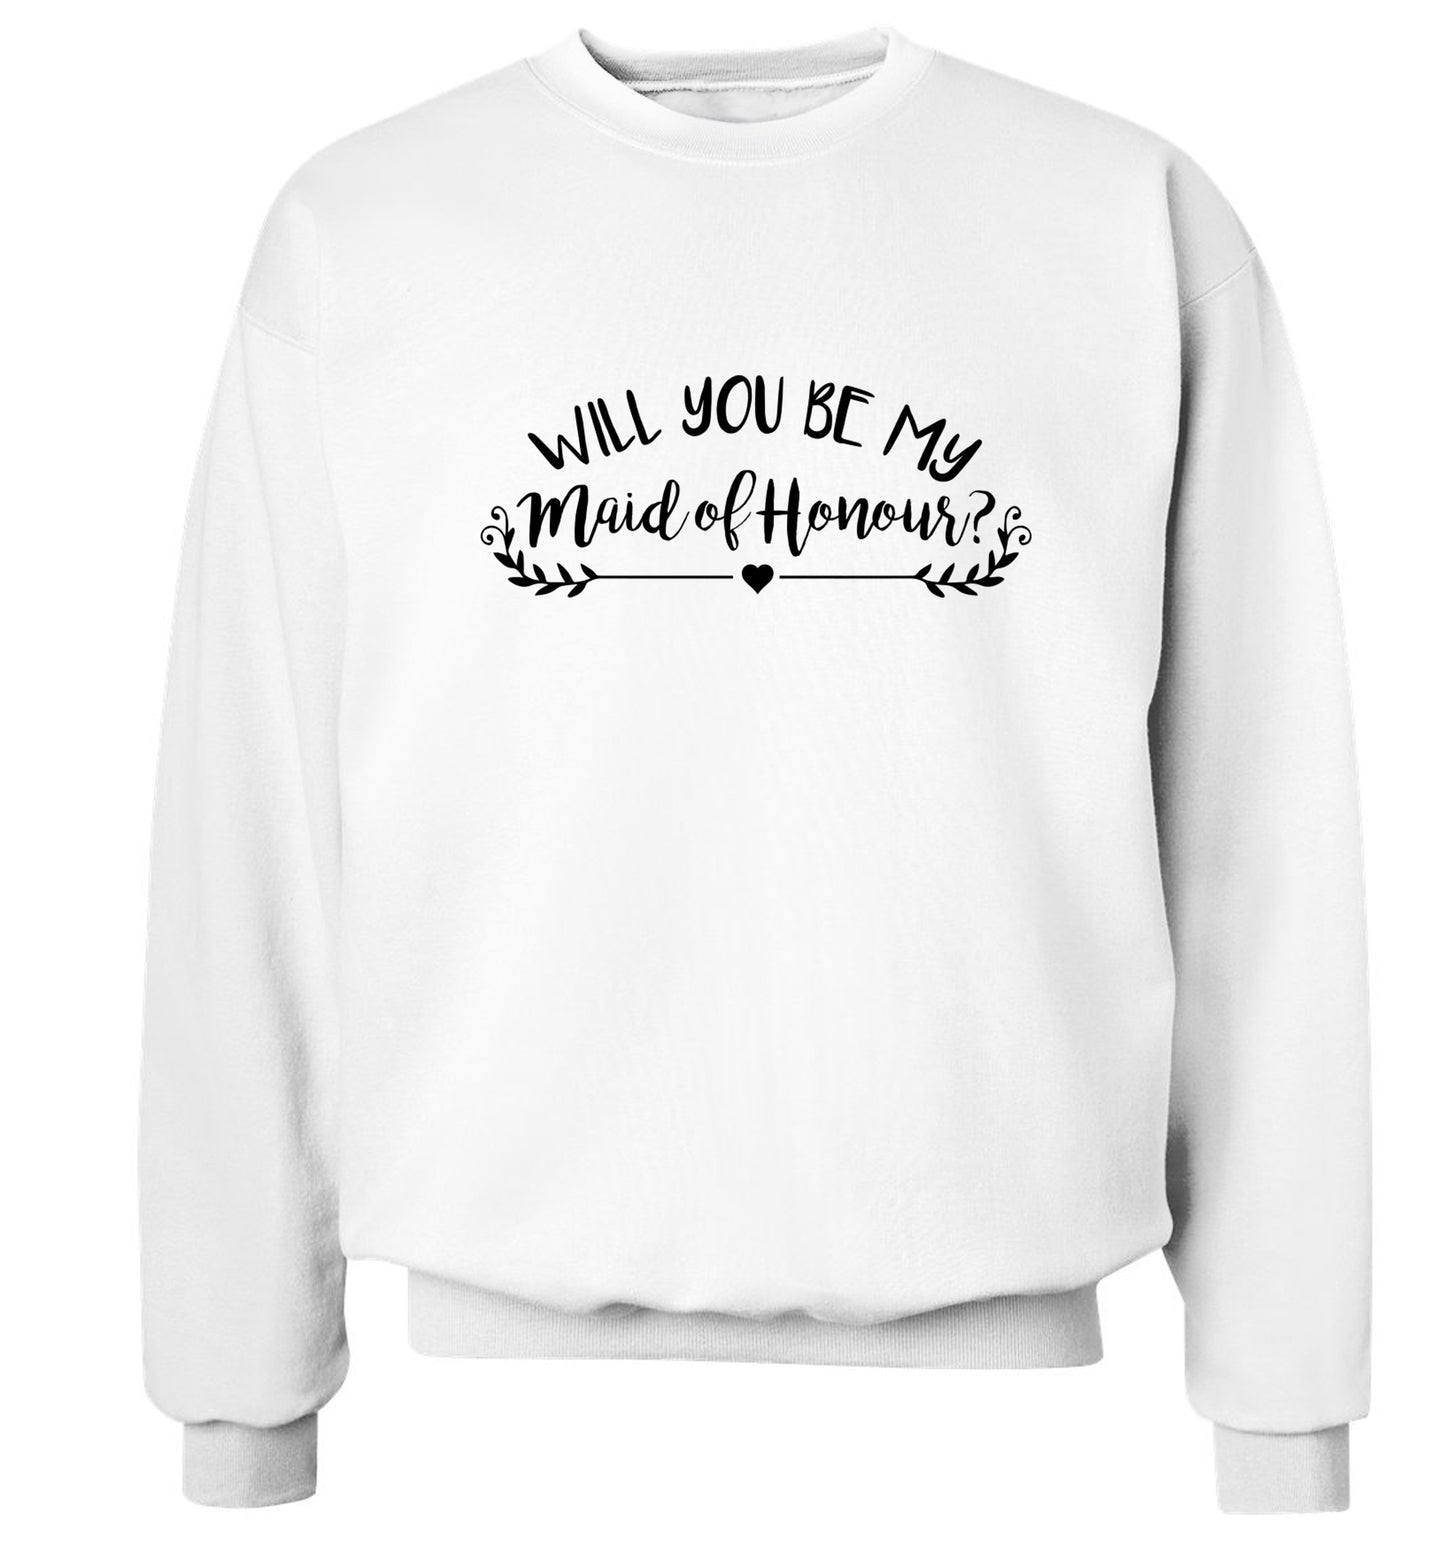 Will you be my maid of honour? Adult's unisex white Sweater 2XL